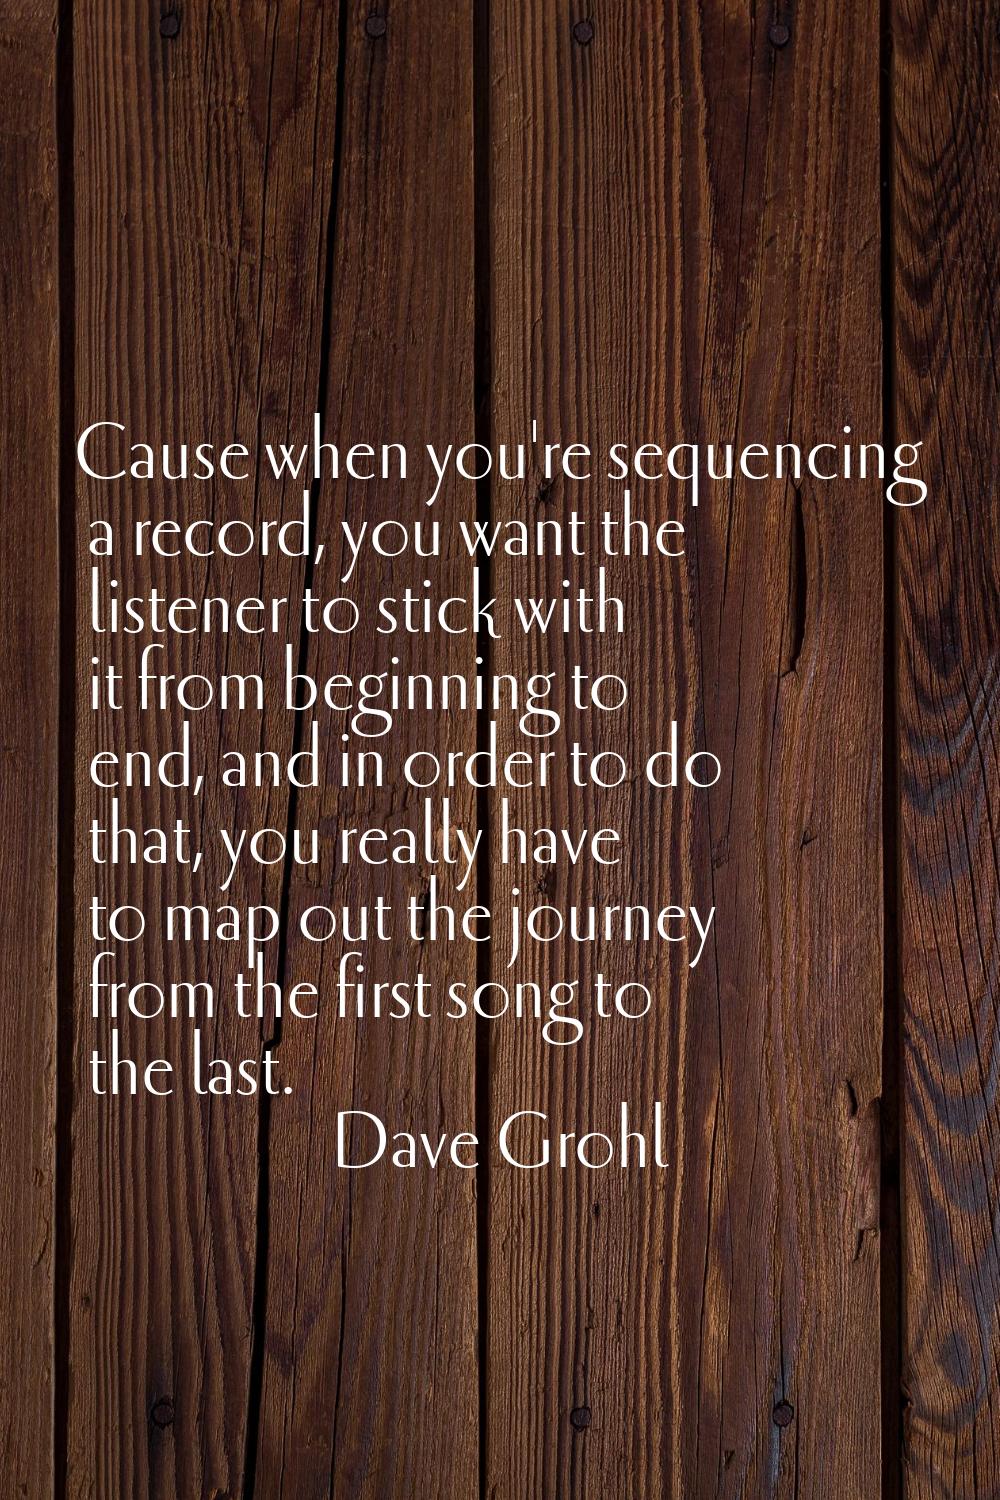 Cause when you're sequencing a record, you want the listener to stick with it from beginning to end